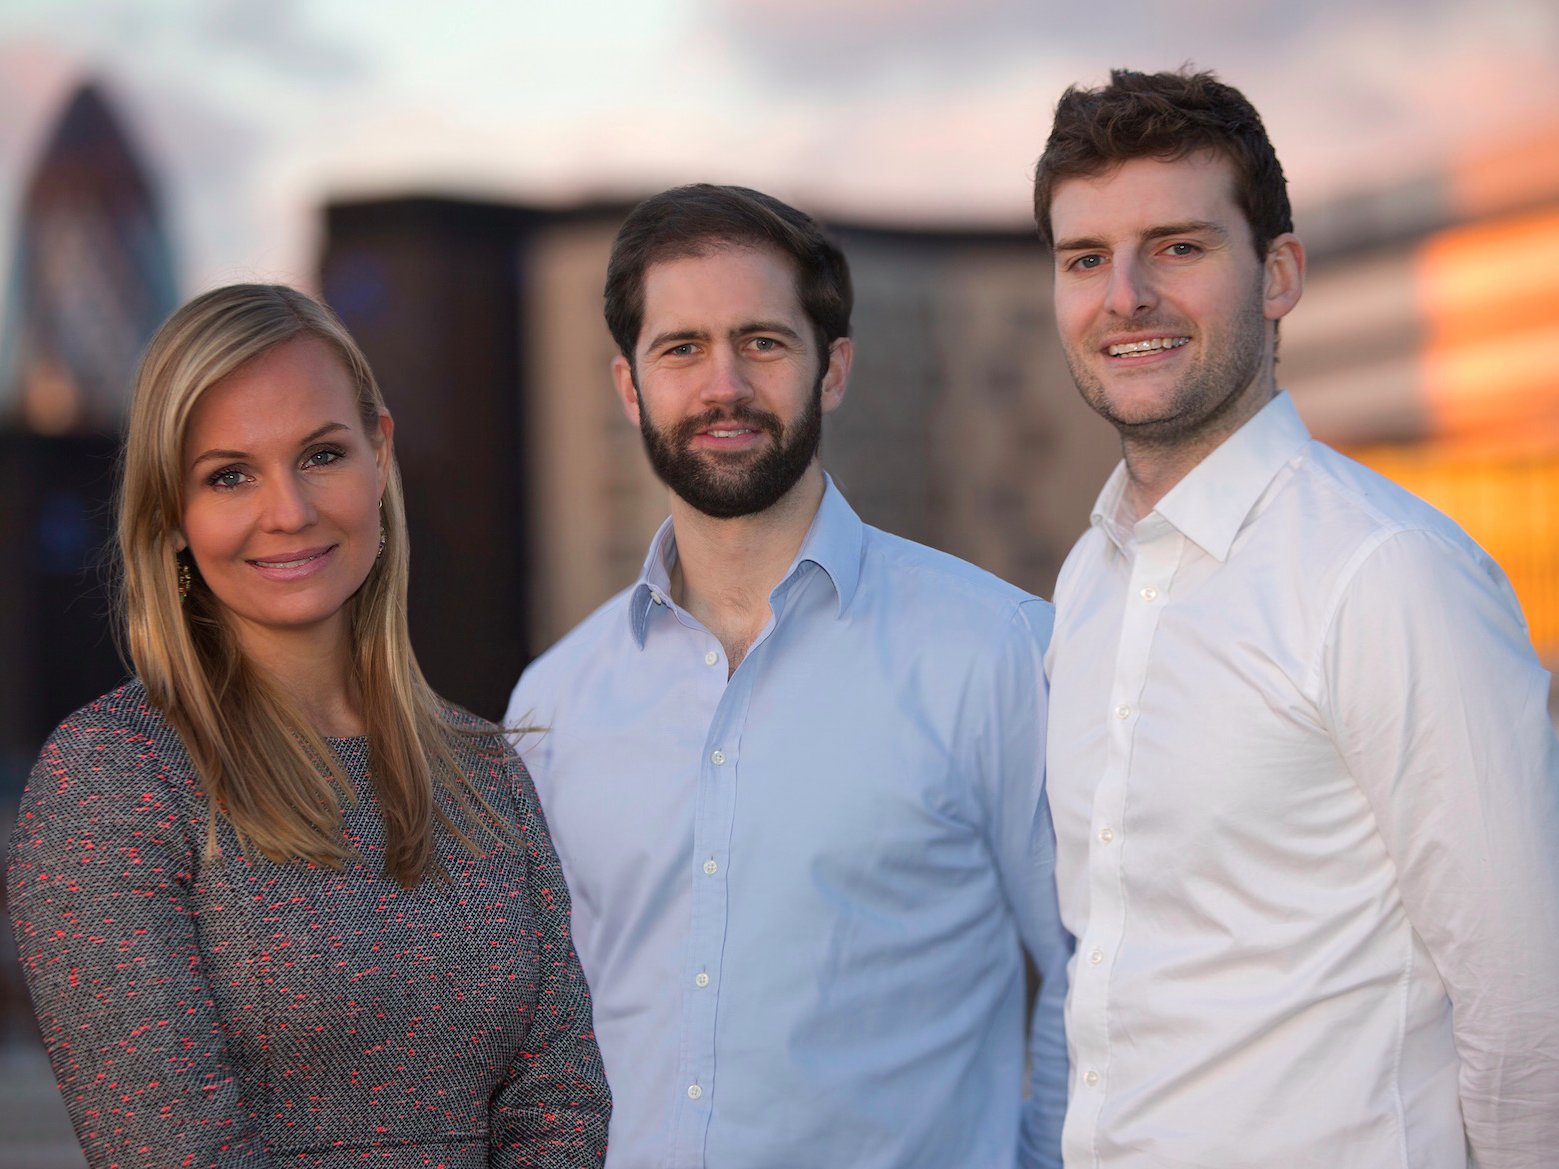 Startup wealth manager Scalable Capital has attracted €100 million in just 10 months